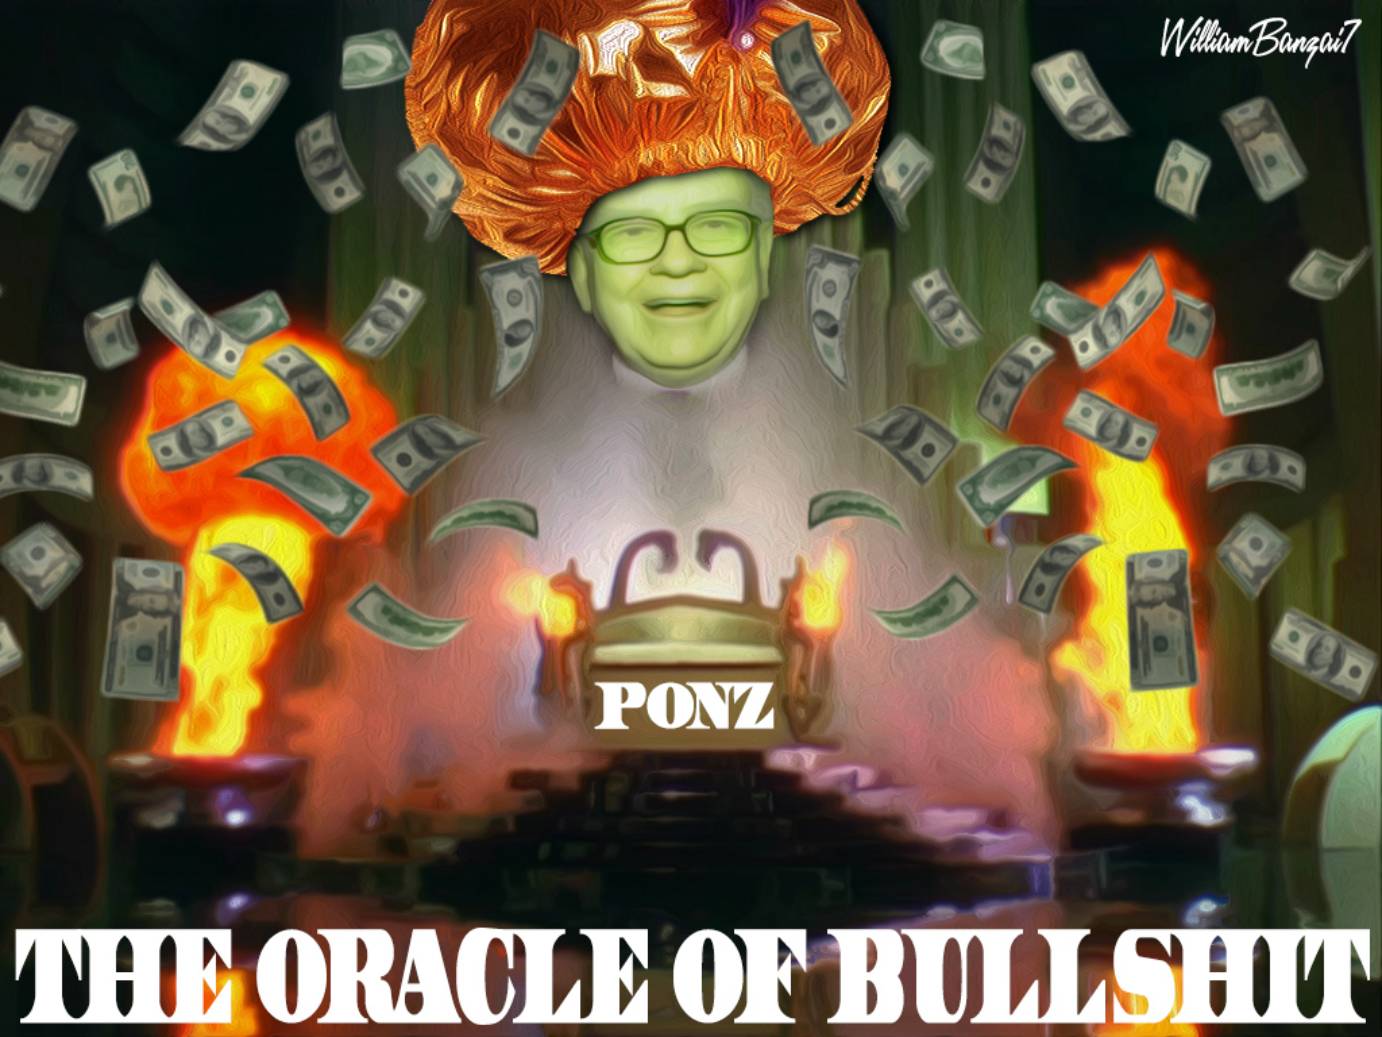 THE WIZARD OF PONZ (AKA THE ORACLE OF BULLSHIT)